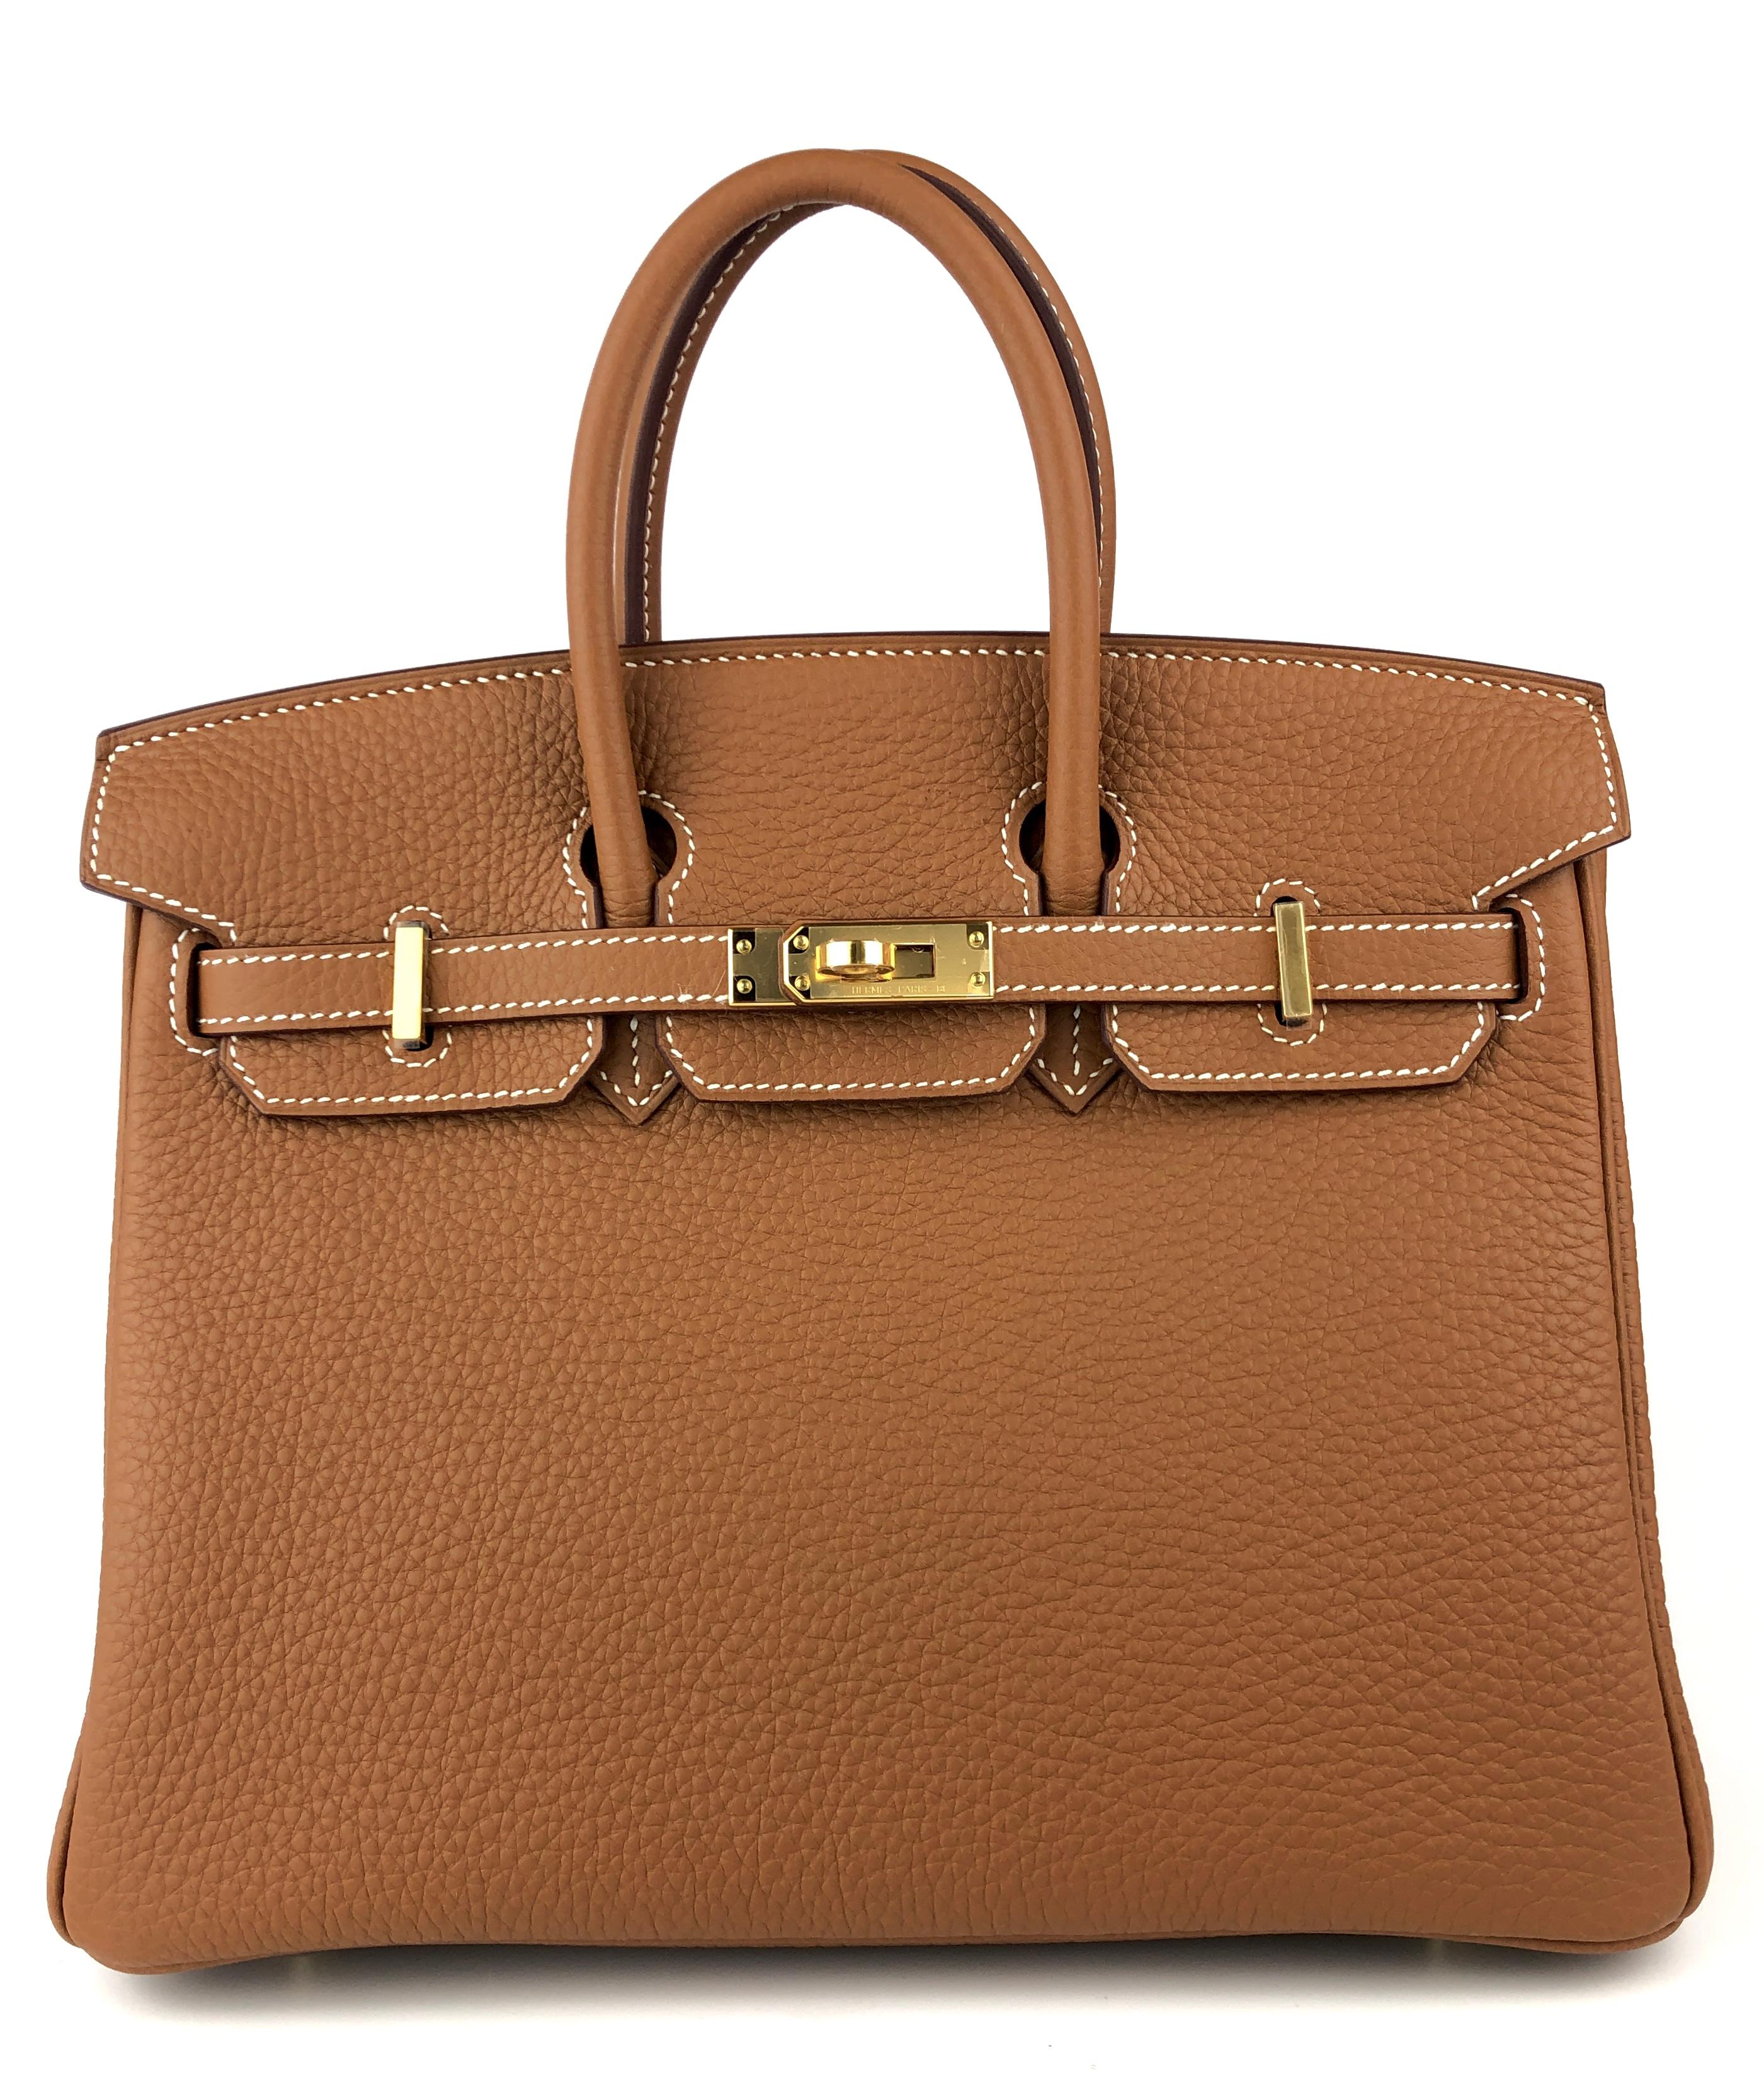 Classic Absolutely Stunning New Rare Hermès Birkin 25 Gold Togo Leather Gold Hardware. U Stamp 2022. 
One of the most coveted hardest combinations to get! Includes all accessories and Box. 

Shop with Confidence from Lux Addicts. Authenticity